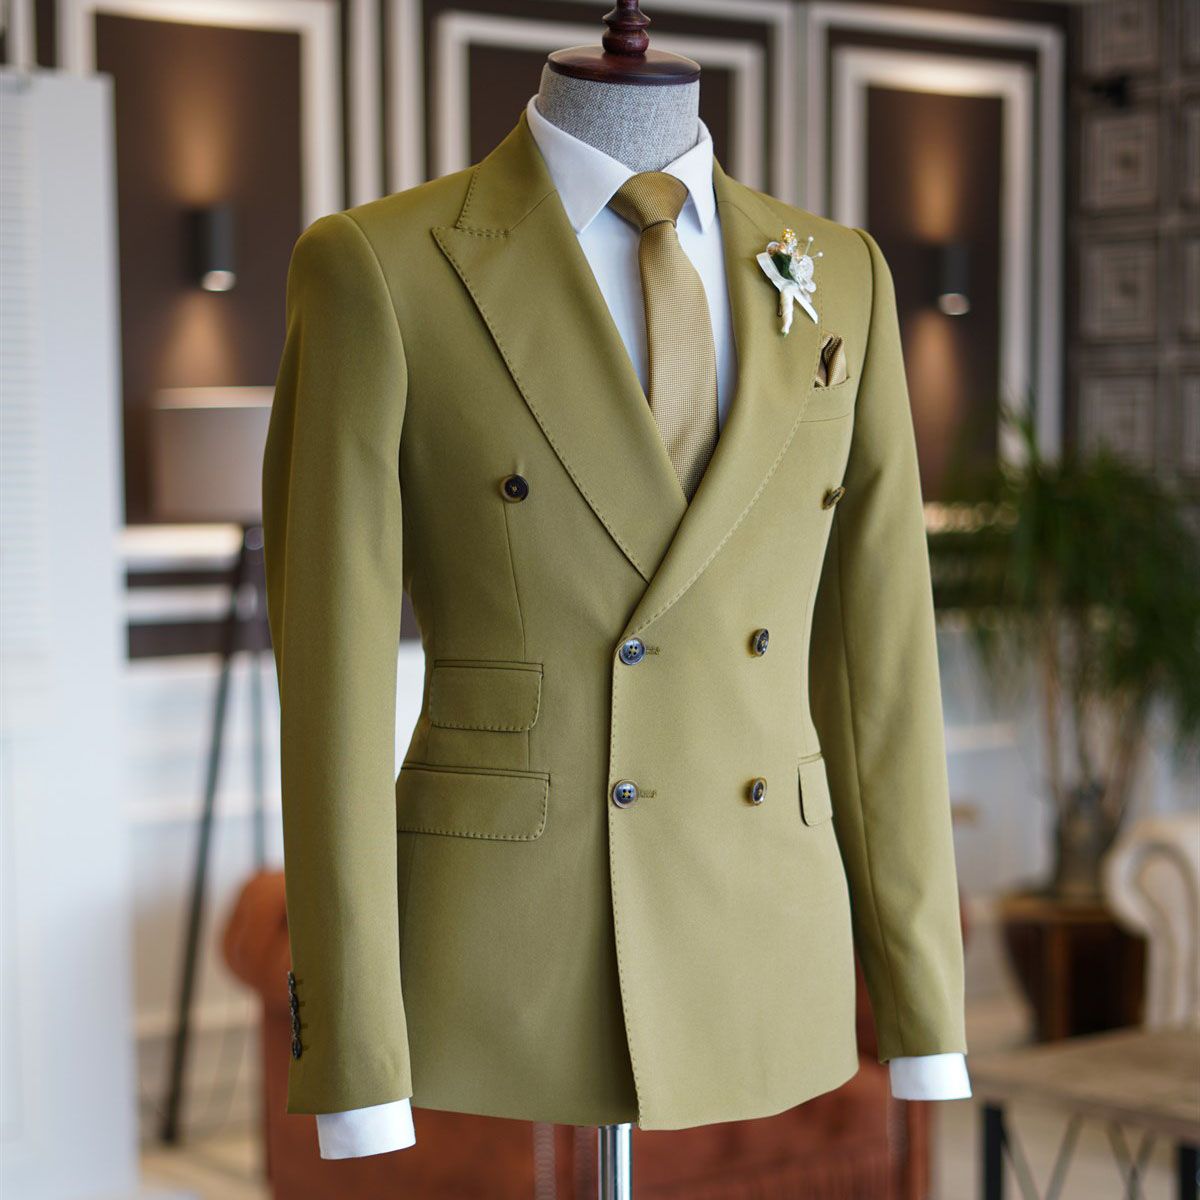 2022 Peaked Lapel Green Suits For Men with Double Breasted